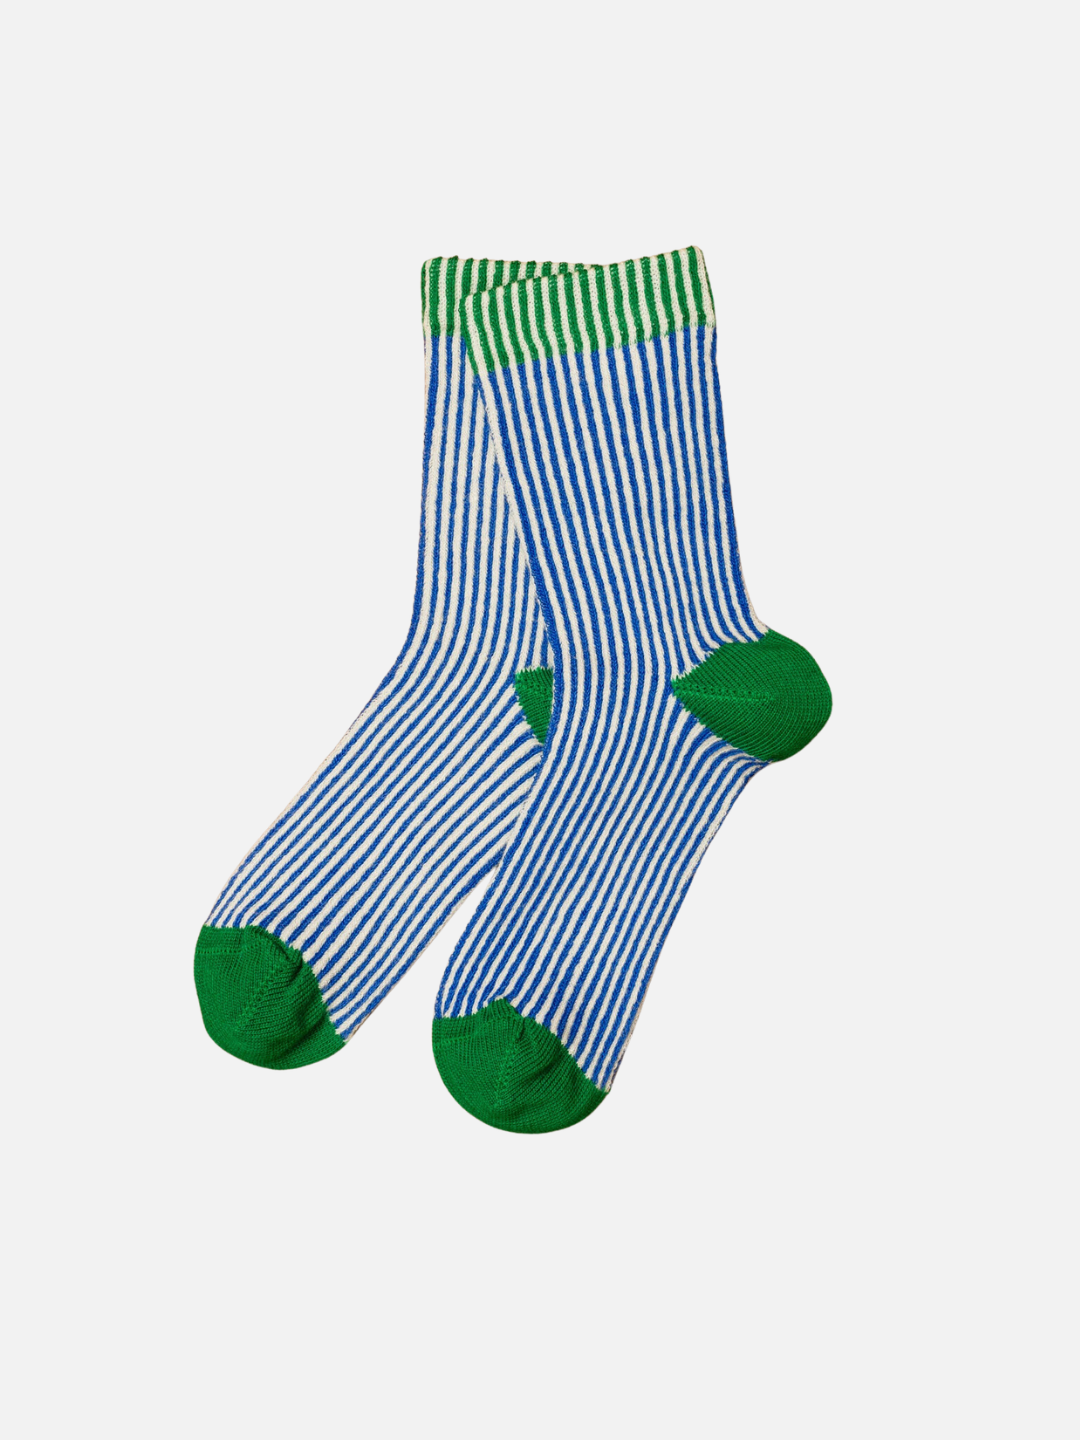 Kids socks in narrow blue and white vertical stripes with kelly green toe, heel, and green stripes at ankle cuff.